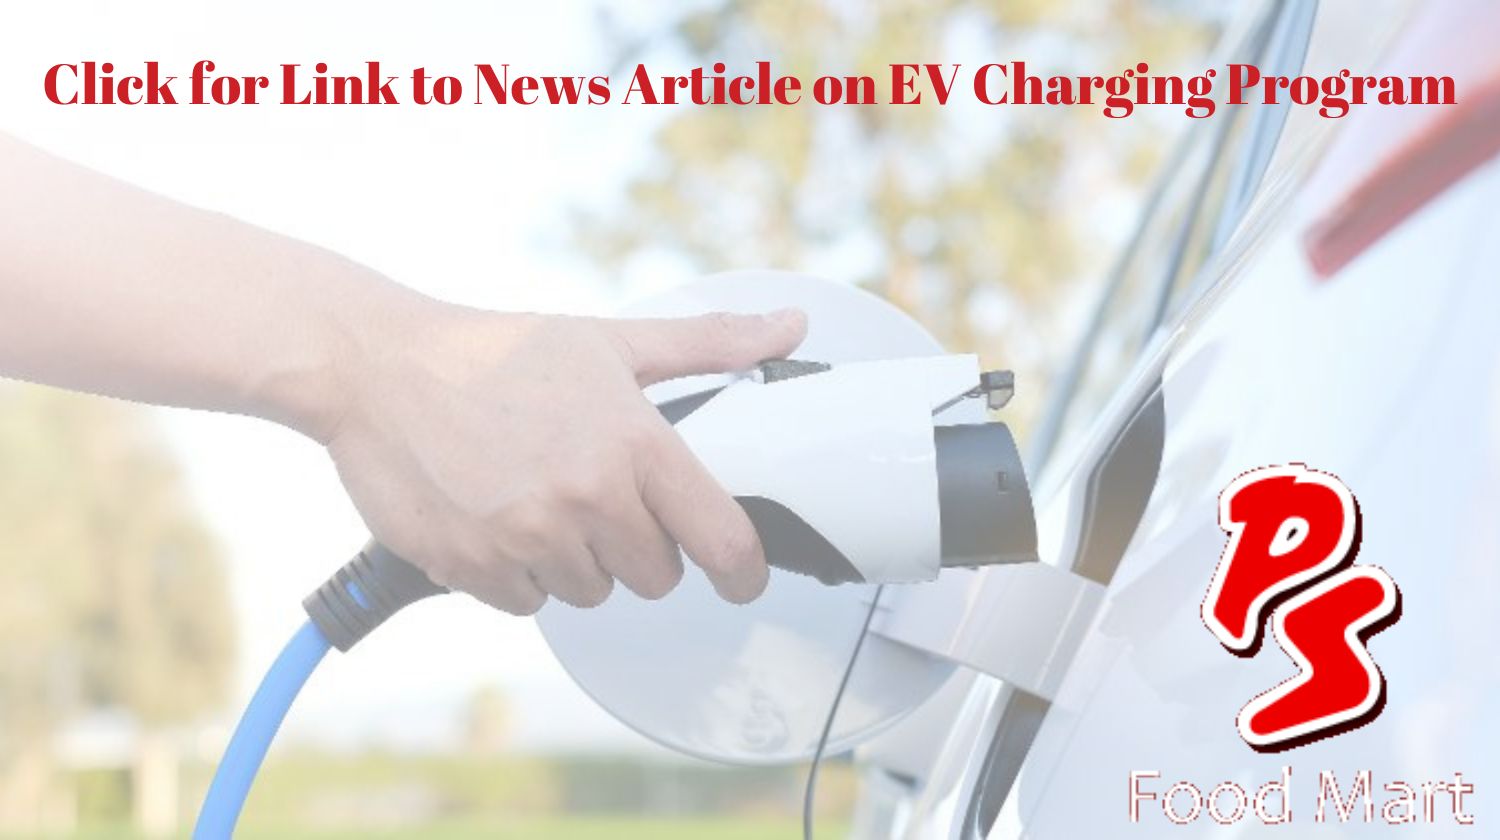 Click for Link to News Article on EV Charging Program